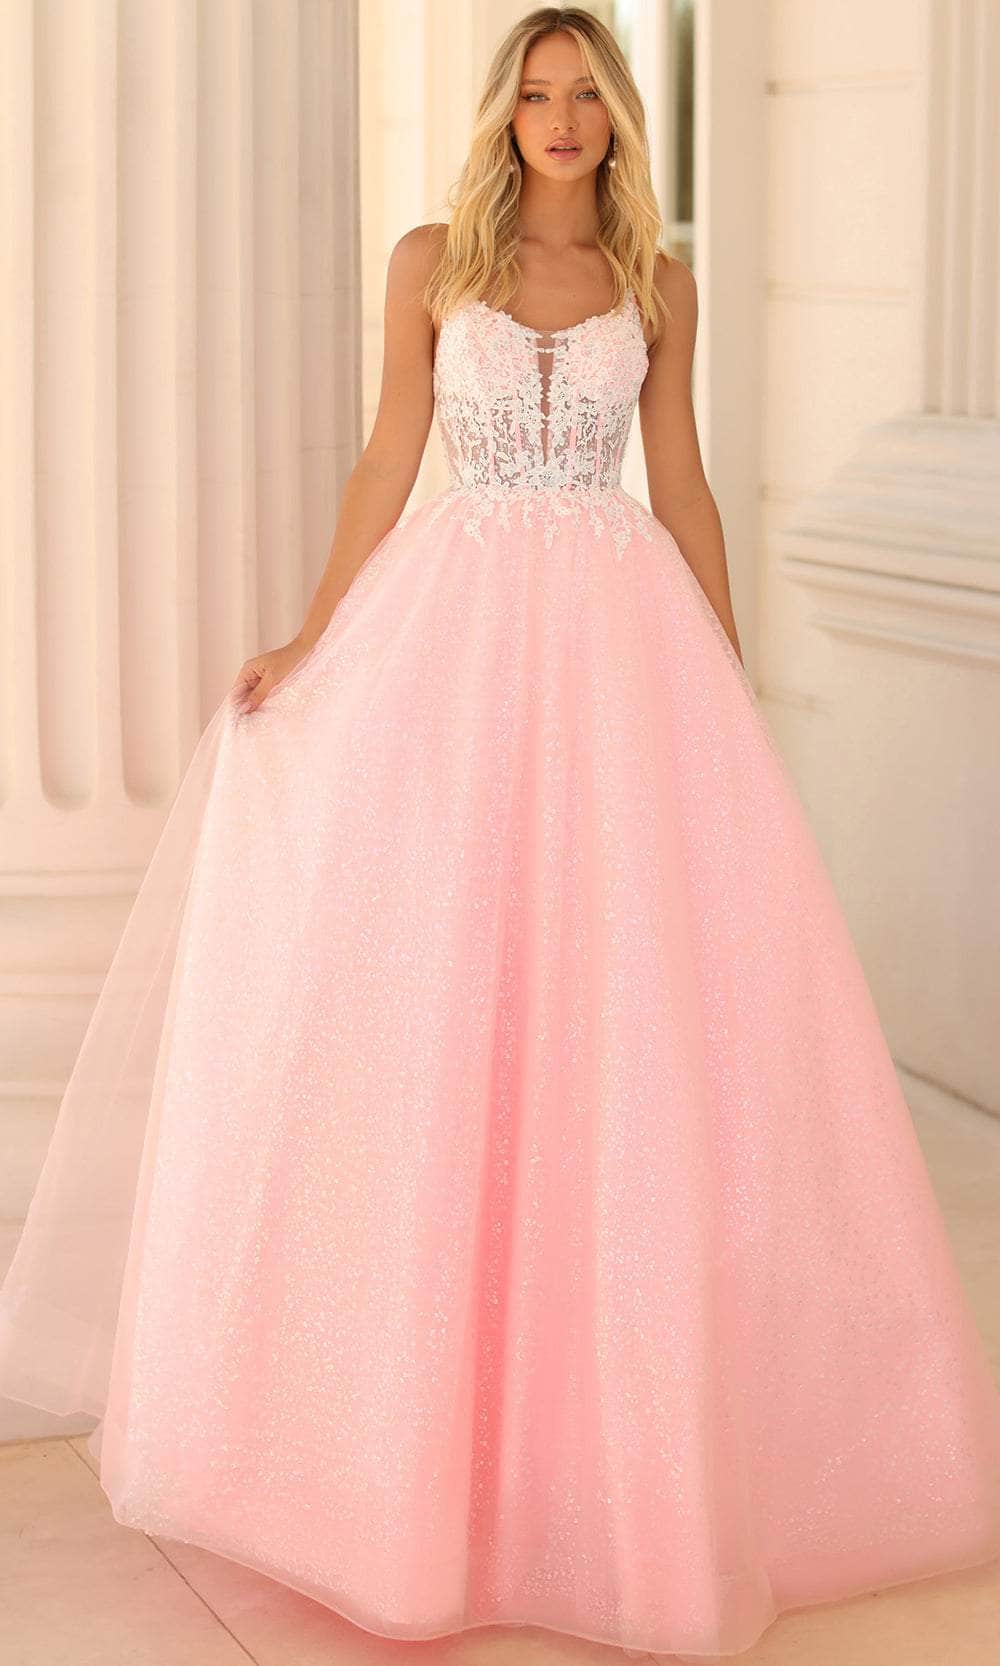 Clarisse 810602 - Dual Strap Shimmer Ballgown Special Occasion Dress 00 / Ivory/Pink